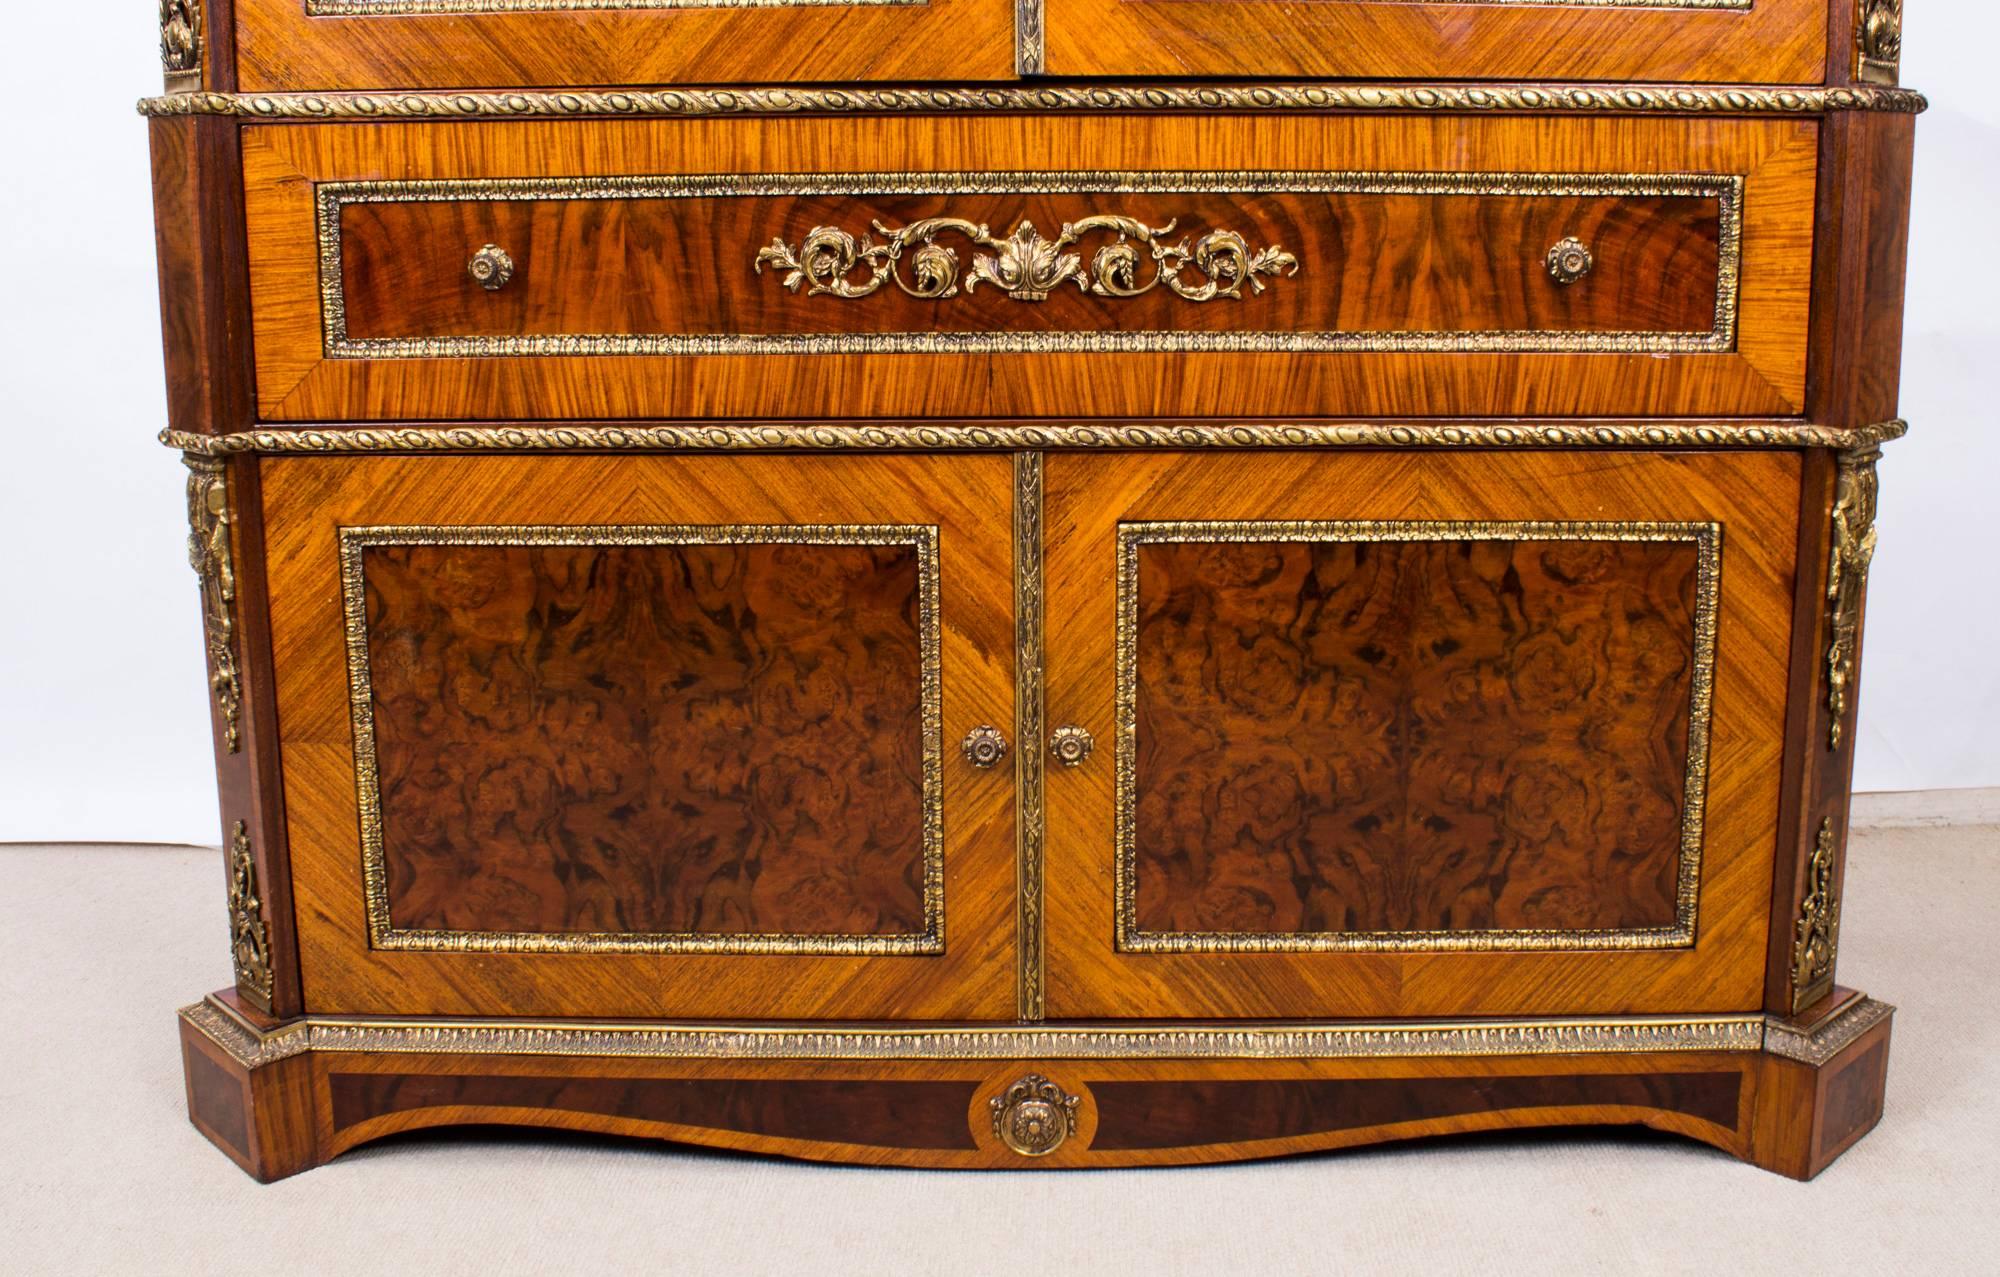 This is a superb large French Louis XV revival burr walnut and kingwood ormolu-mounted cocktail cabinet, mid-20th century in date. 

Adding to its truly unique character it has been decorated with a plethora of exquisite gilded ormolu